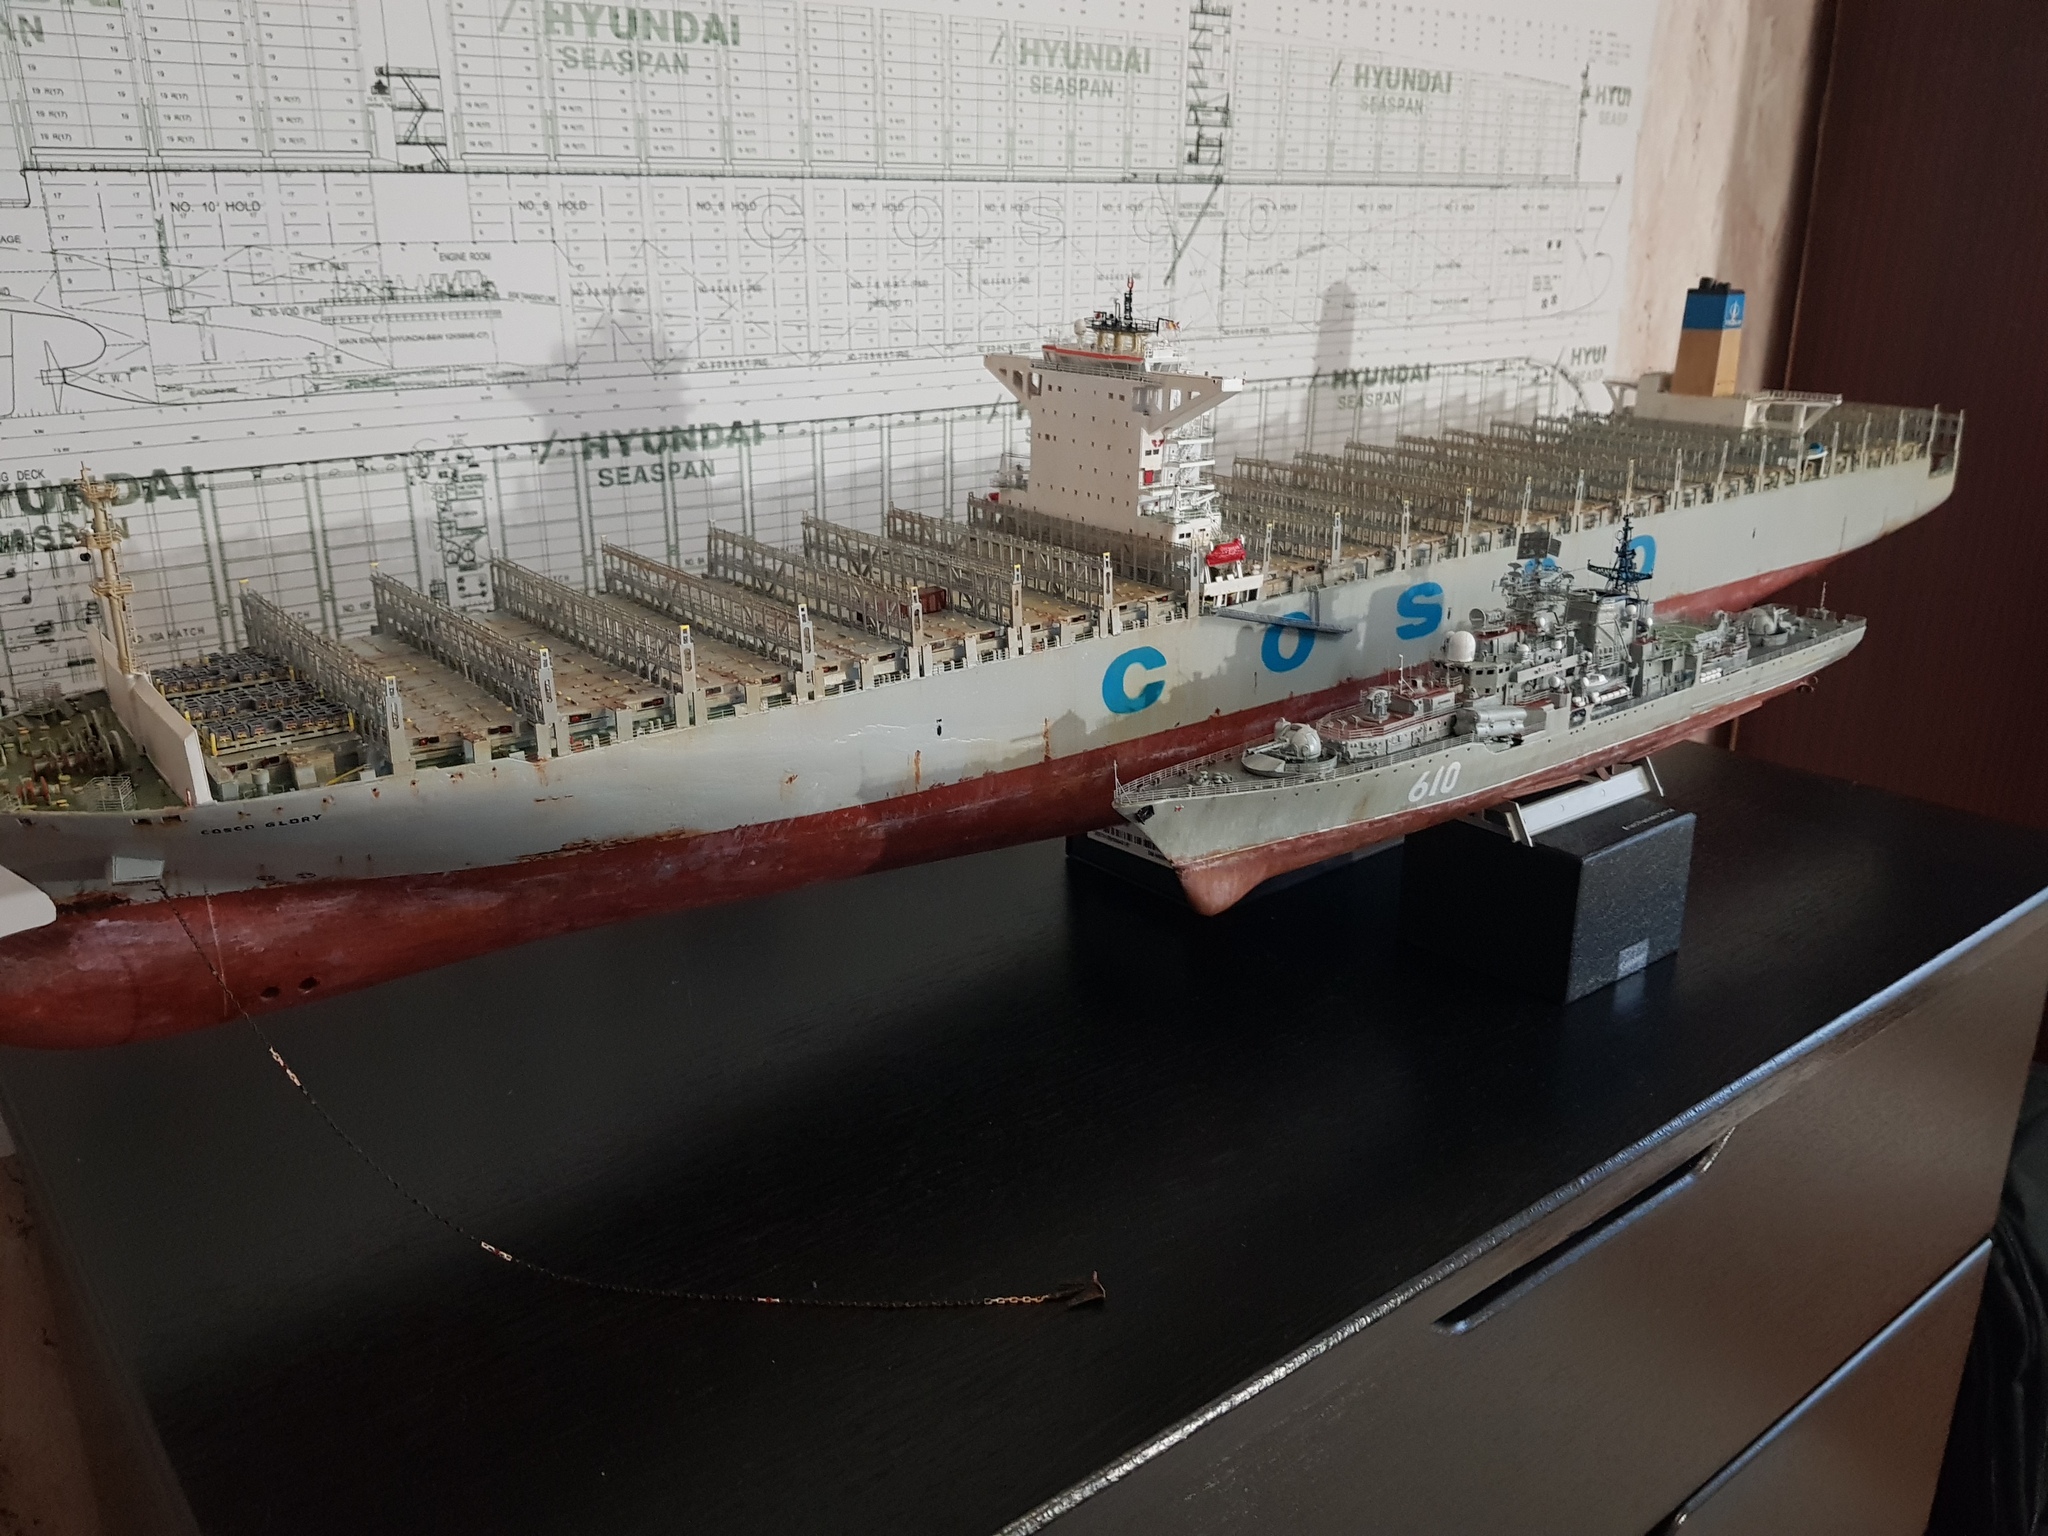 1:350 COSCO container ship - My, Scale model, Vessel, Ship, Modeling, Collection, Miniature, Painting miniatures, Collecting, Longpost